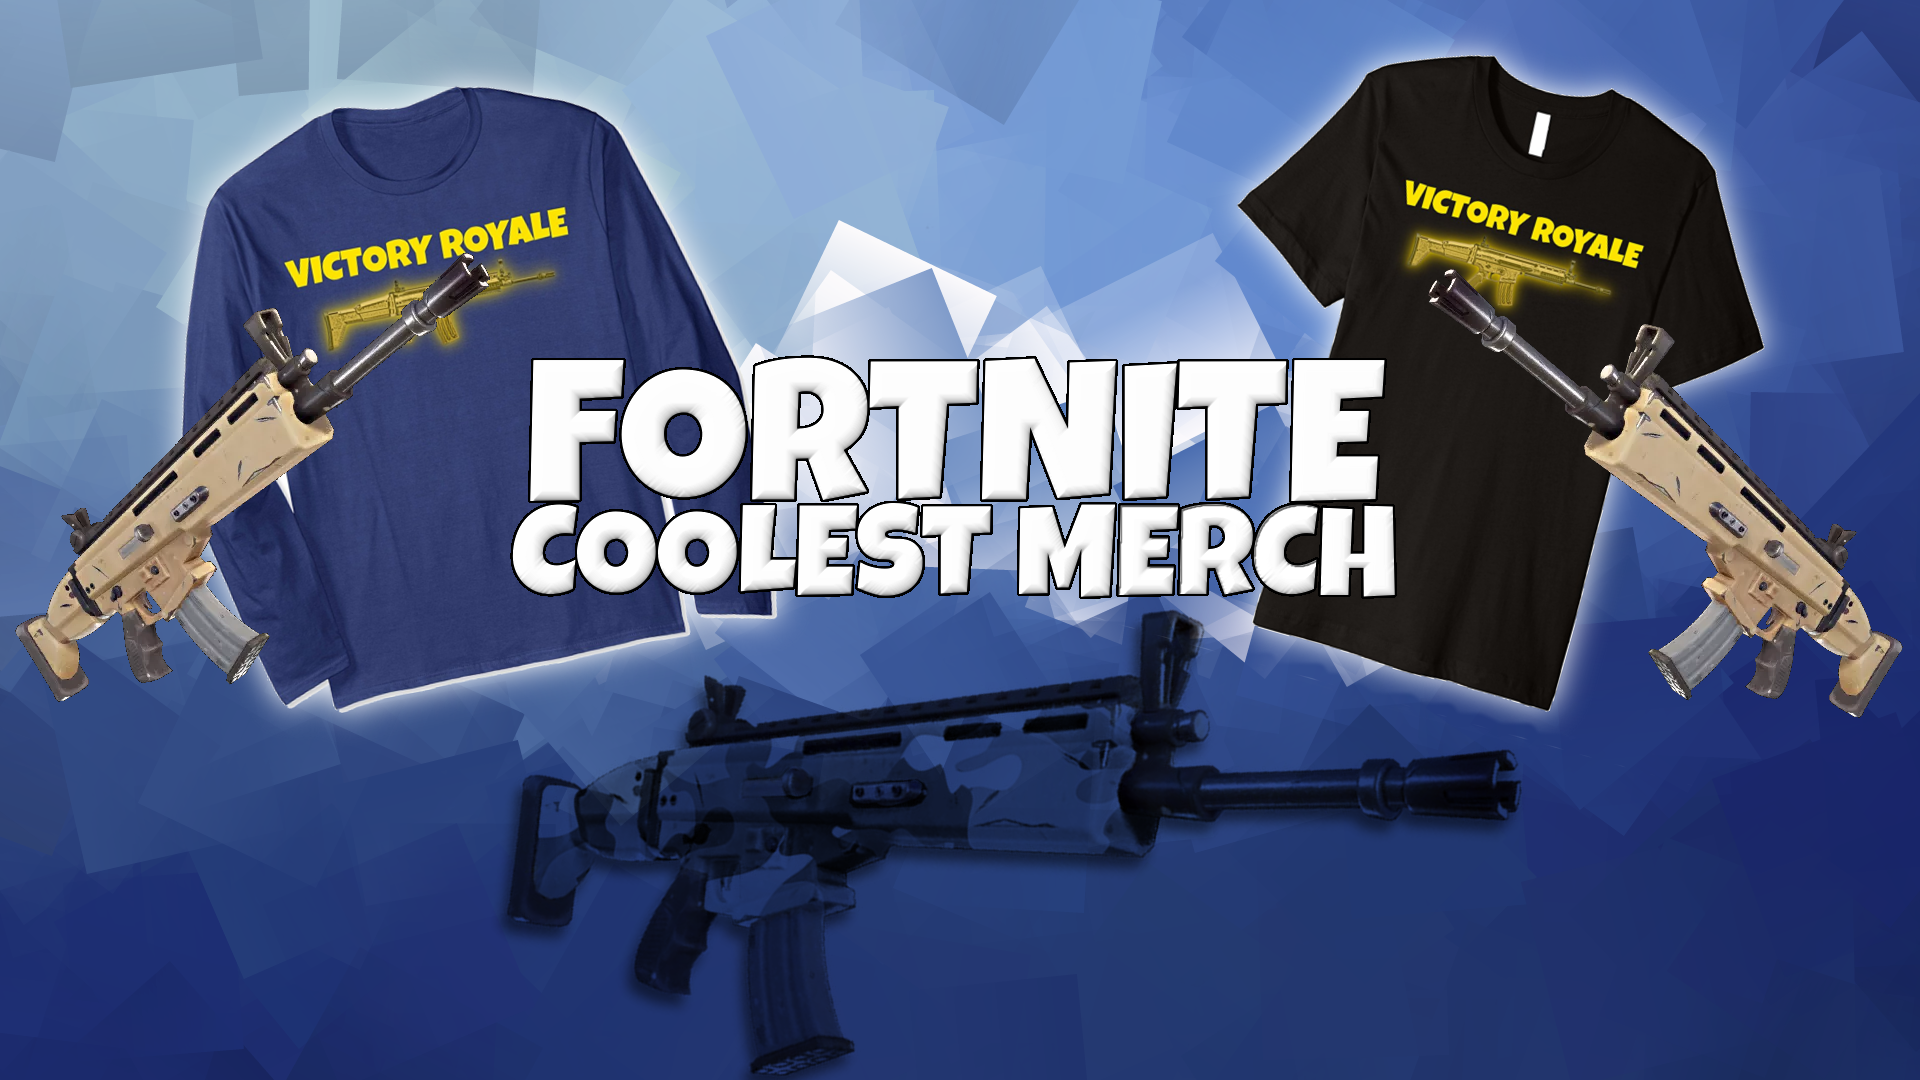 free icons png victory royale t shirt - victory royale fortnite background